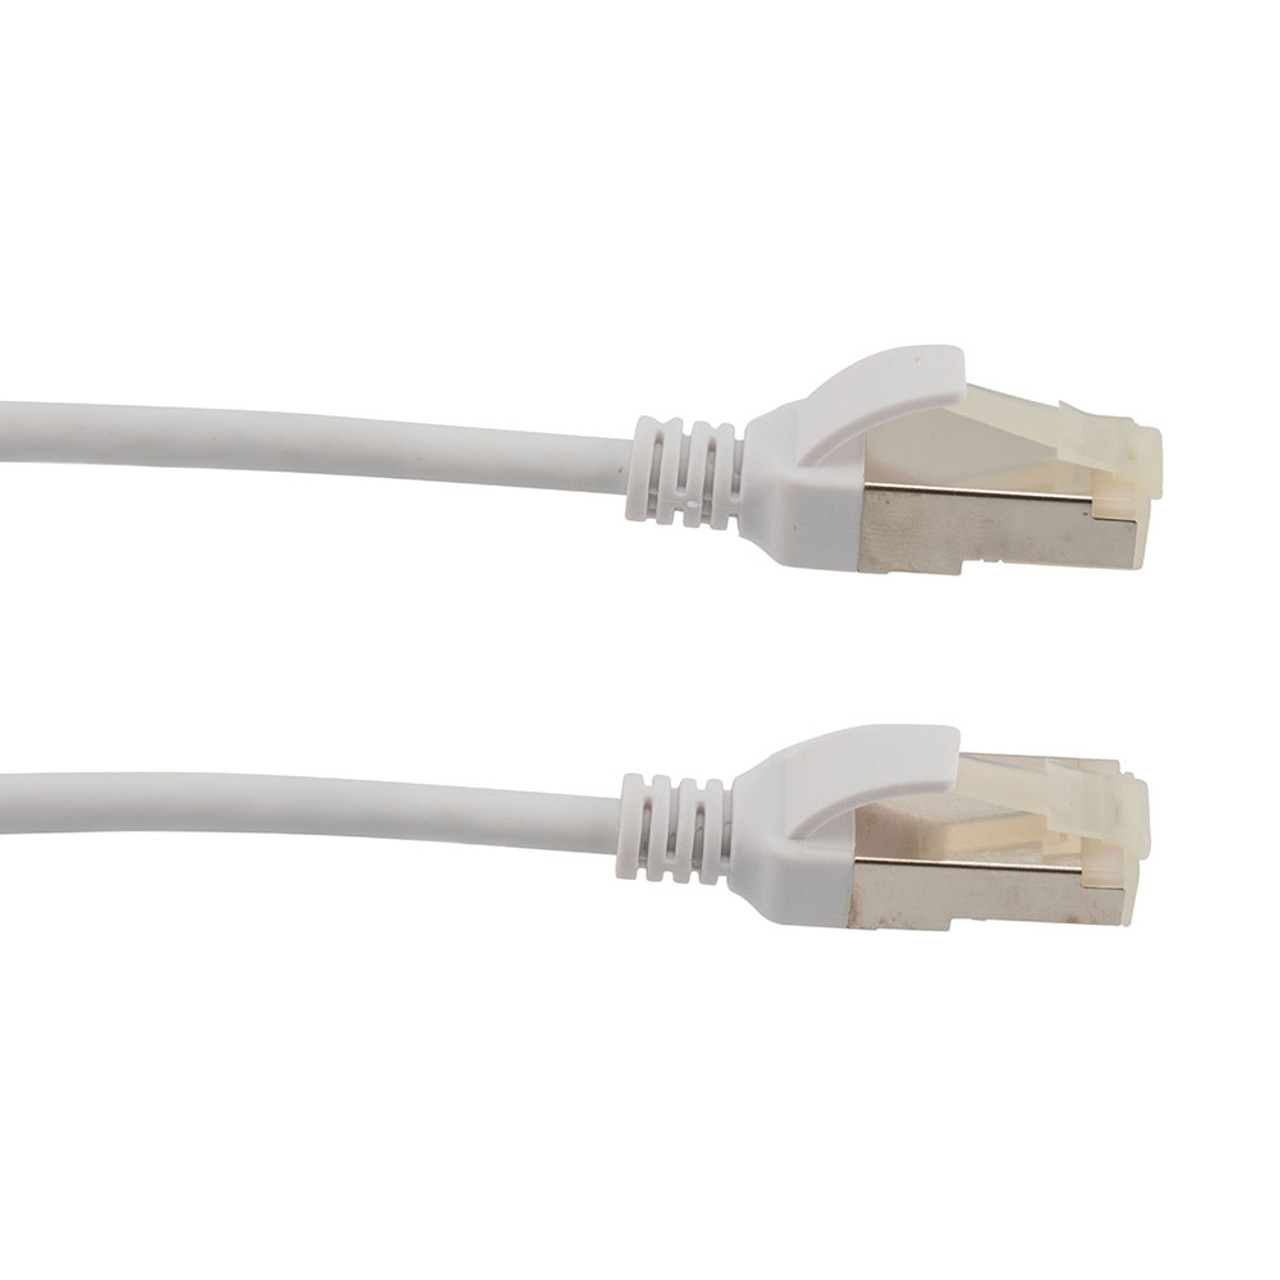 Category 6a 10 Gbps Slim Ethernet Antibacterial Antimicrobial Cable Assembly, RJ45 Male/Plug, S/FTP, 30 AWG, PVC Antibacterial, White, 7 FT